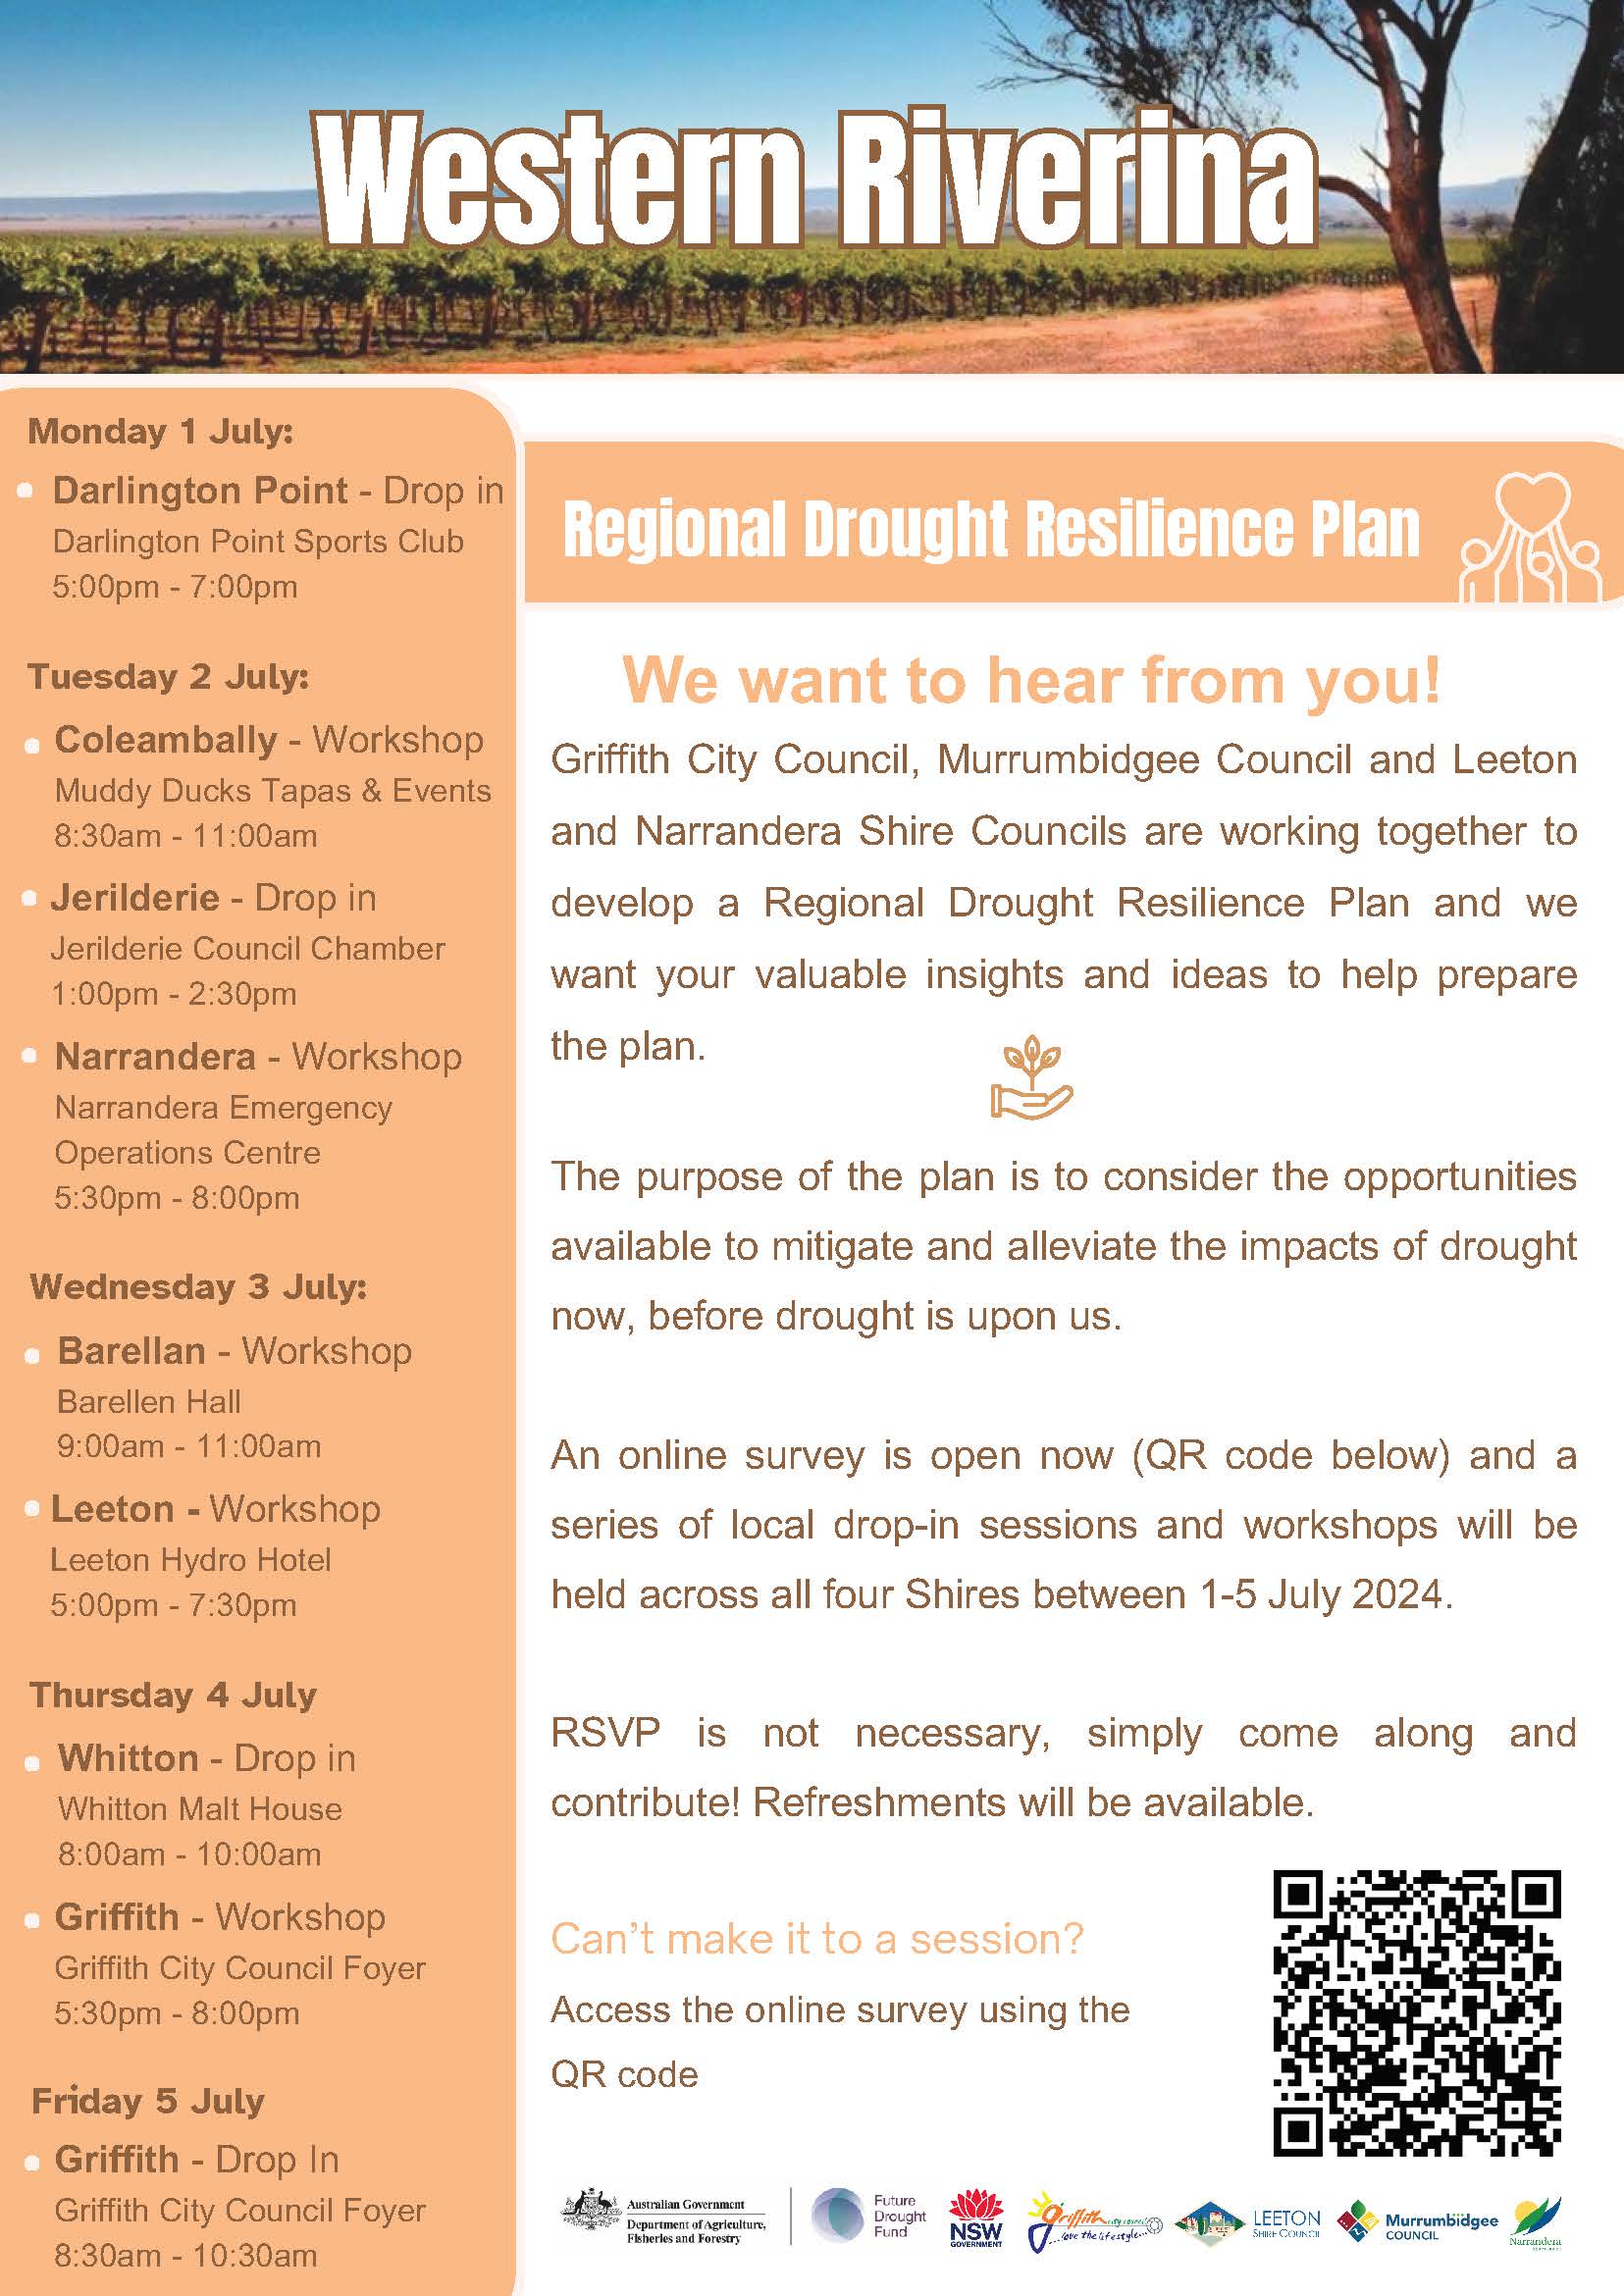 Regional Drought Resilience Plan - Coleambally